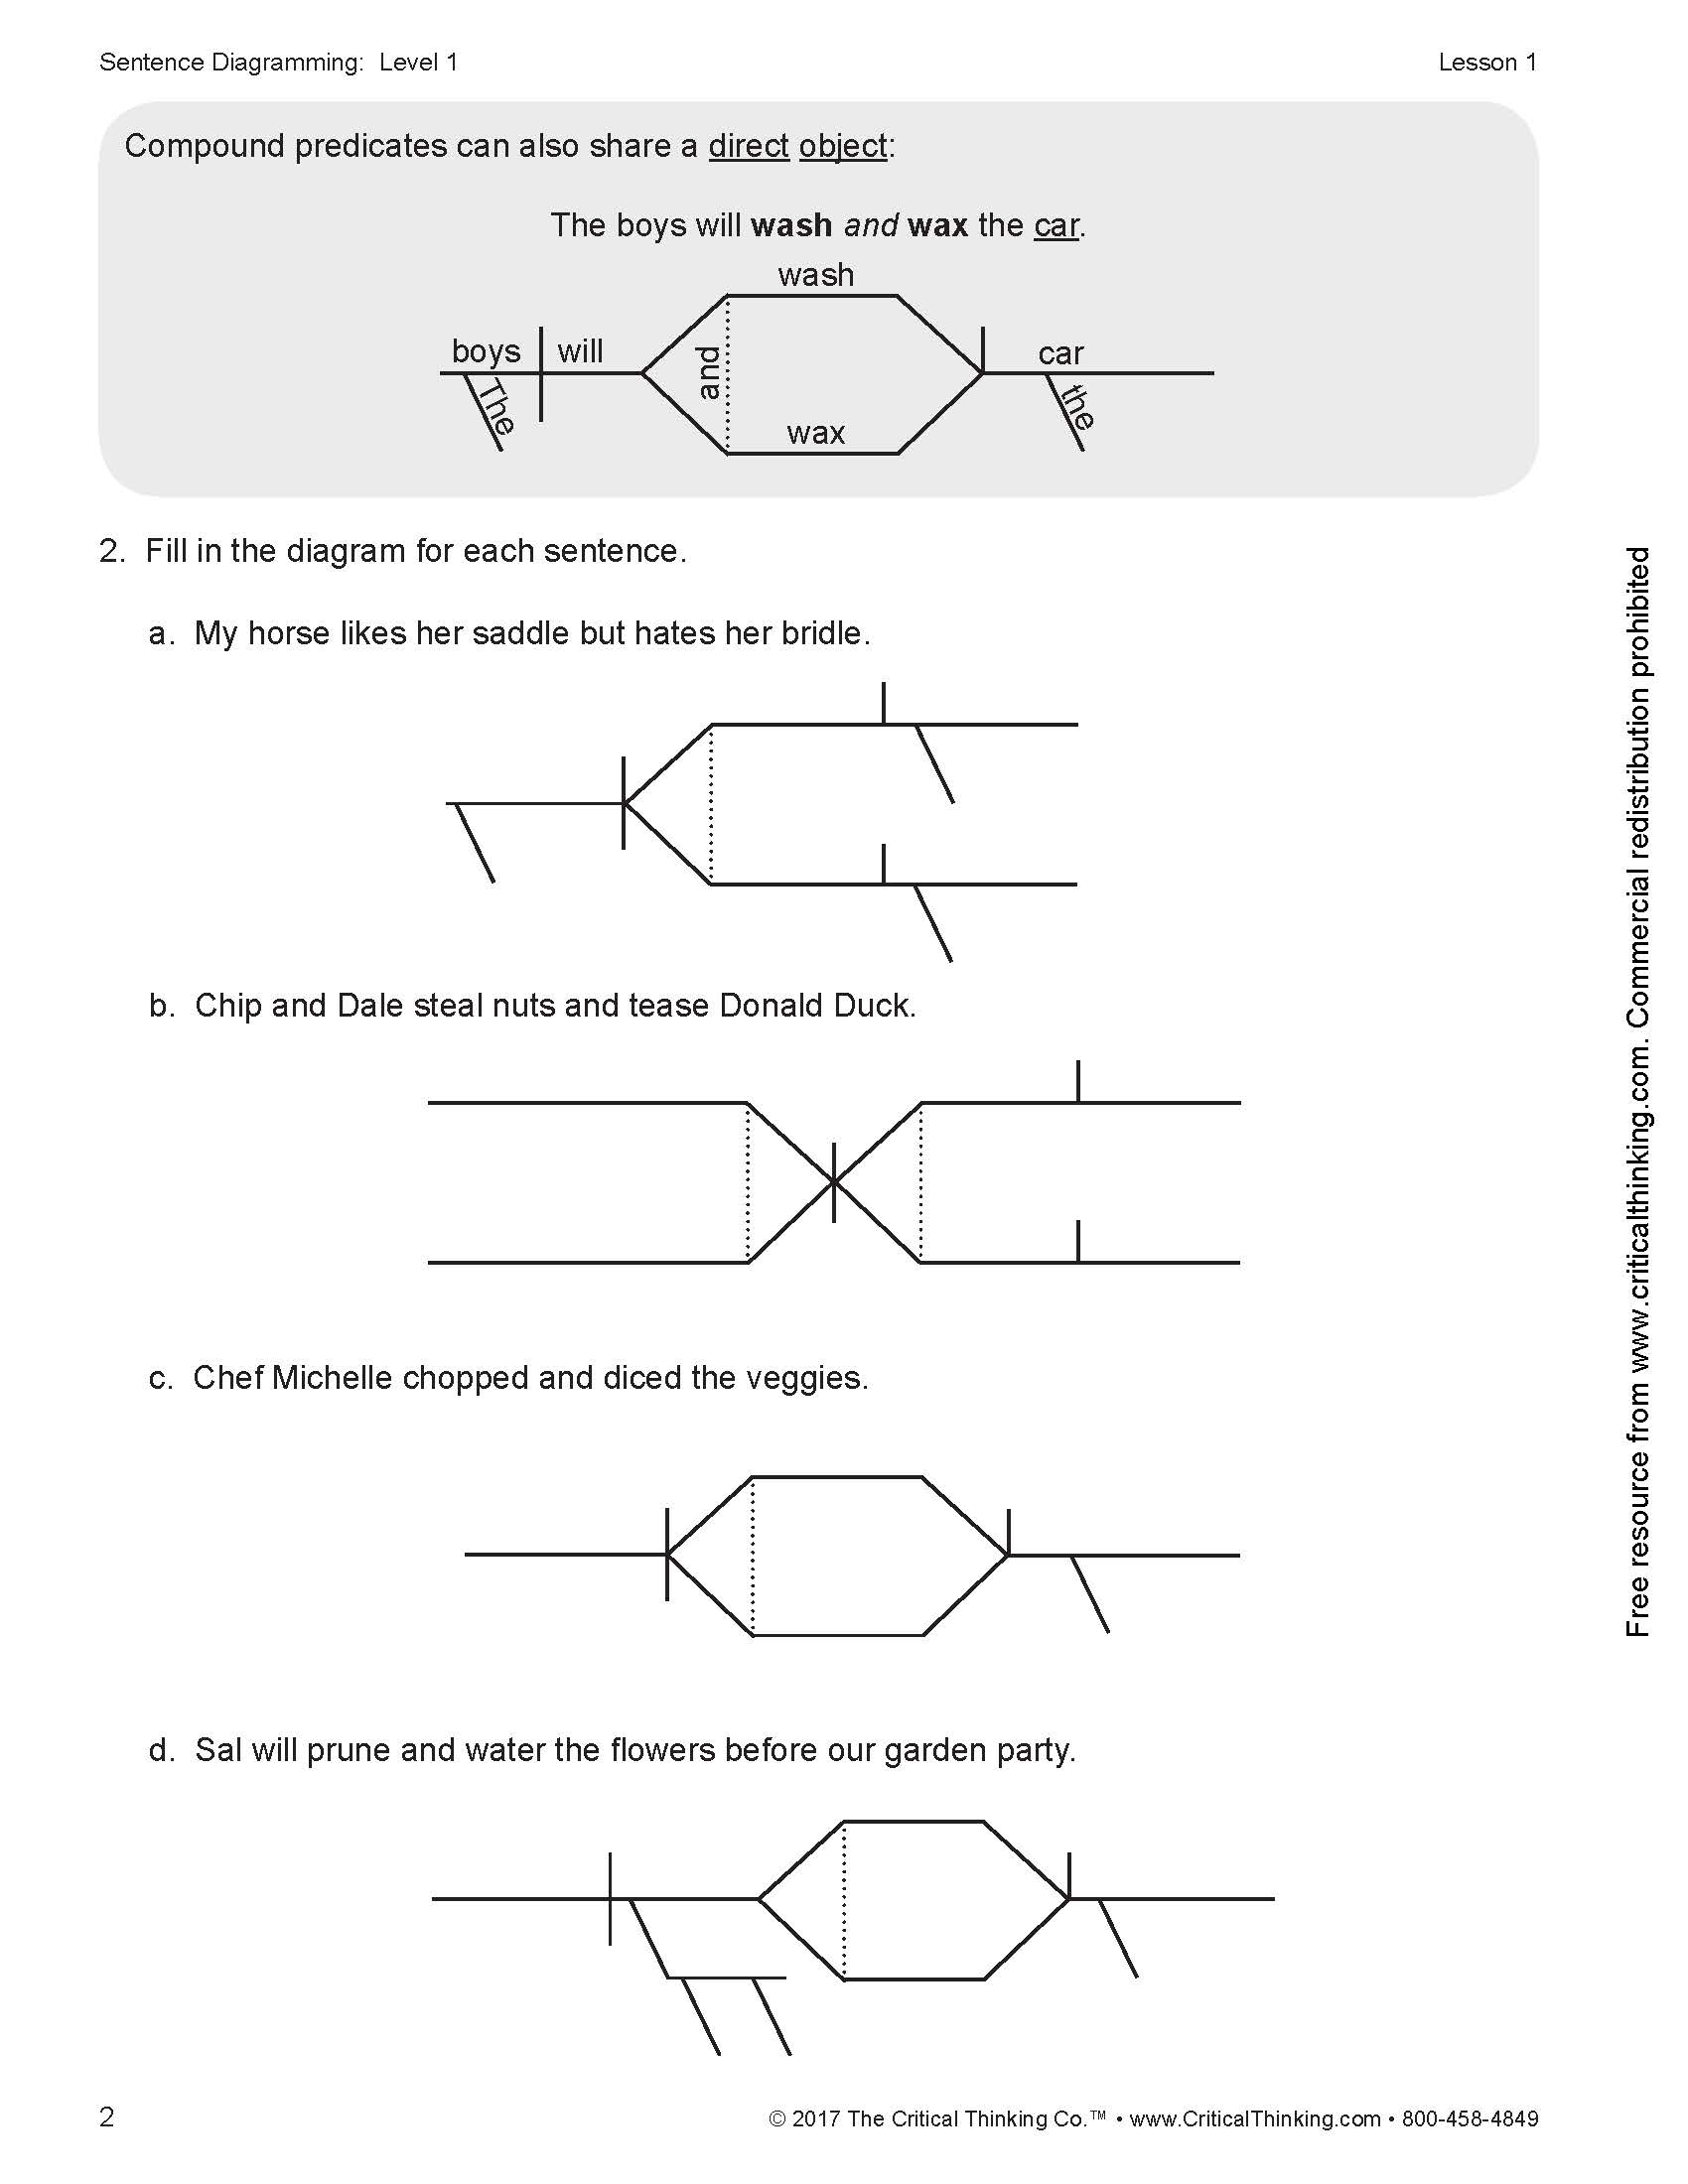 get-in-the-routine-of-using-appositives-with-this-educational-sentence-diagramming-worksheet